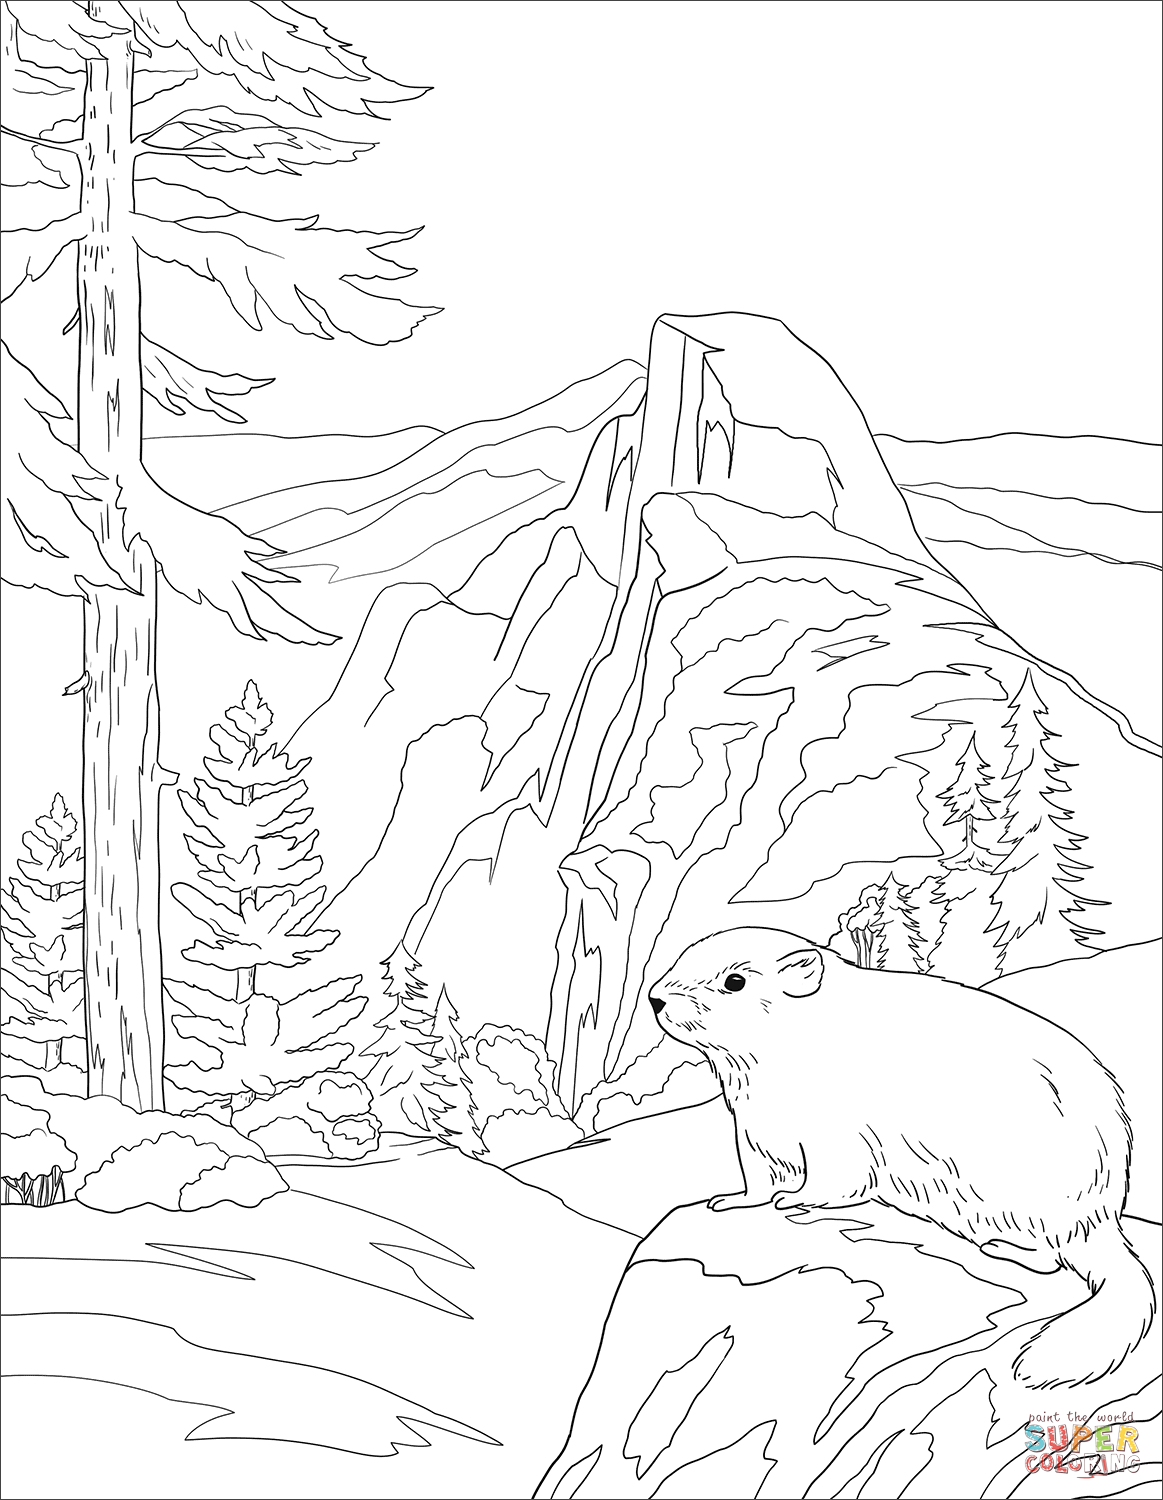 Yosemite national park coloring page free printable coloring pages